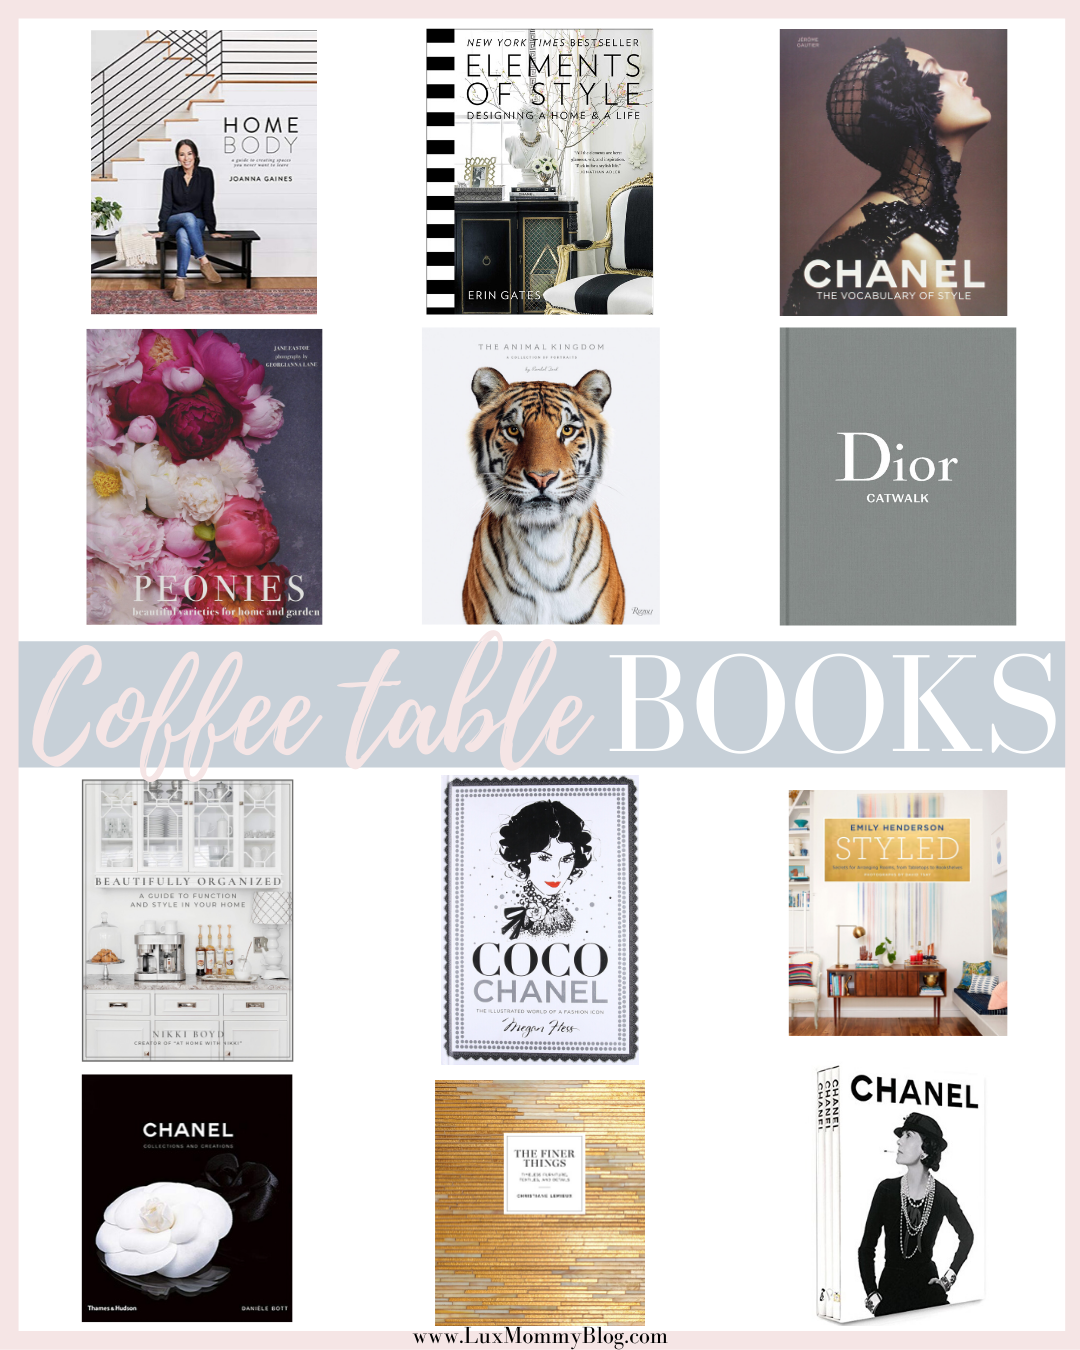 Friday Favorites - Coffee Table Books on Fashion Design - Home with Holliday